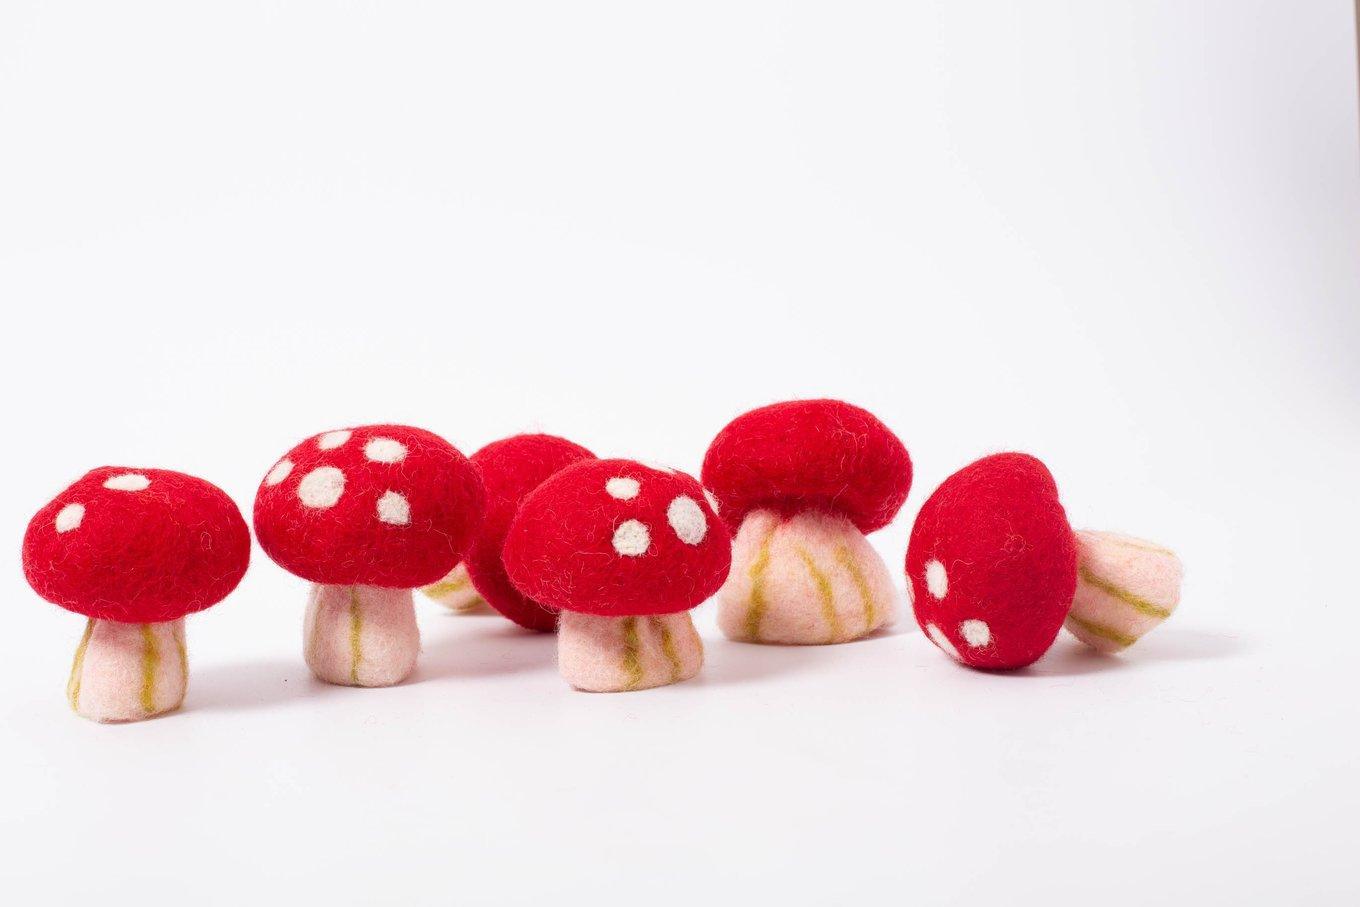 Papoose - Felt Mushroom, 1pc - Why and Whale